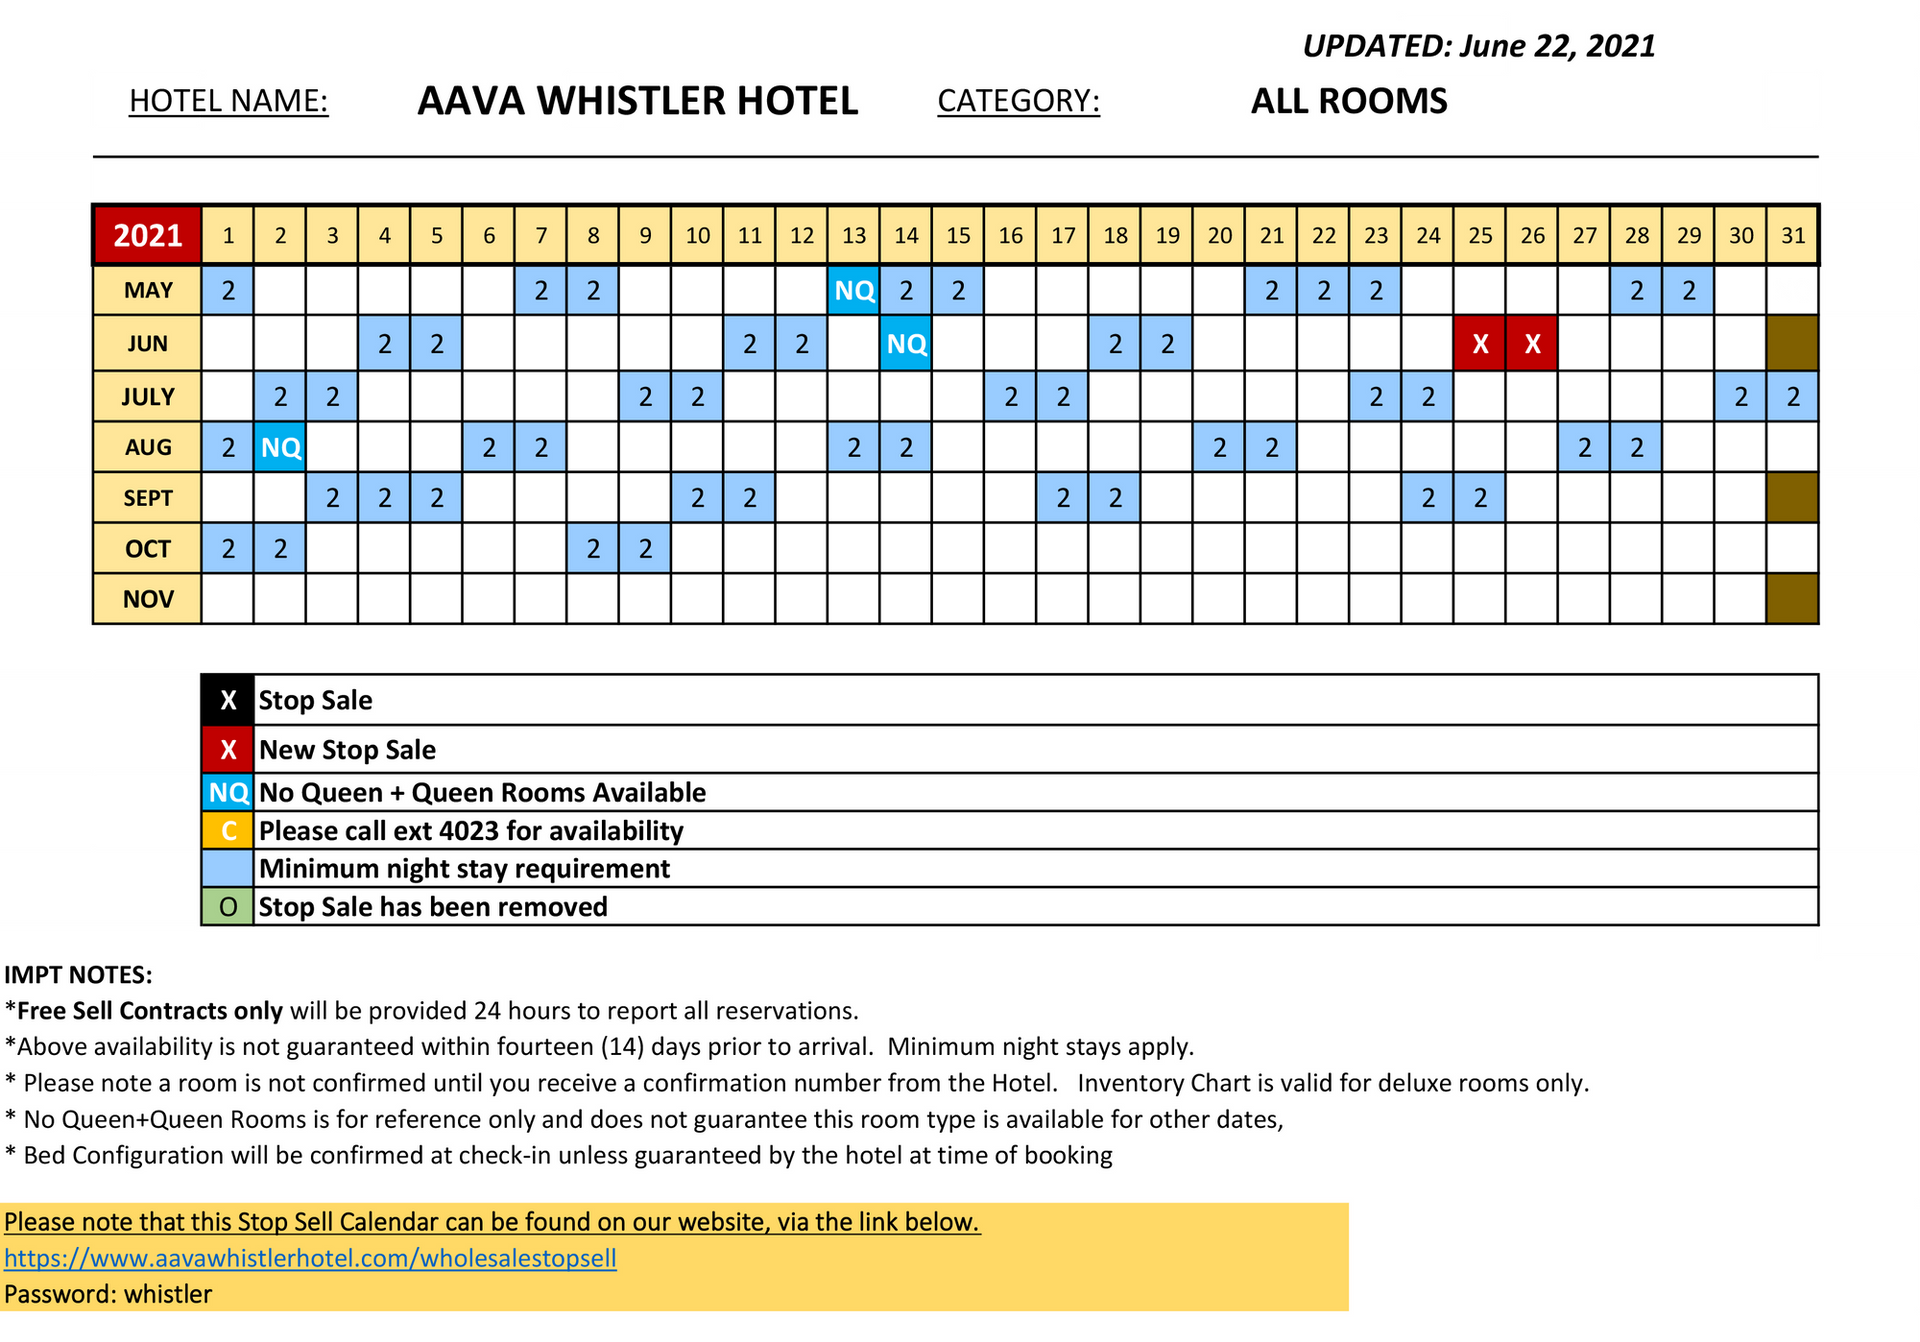 All Rooms reservation chart at Aava Whistler Hotel